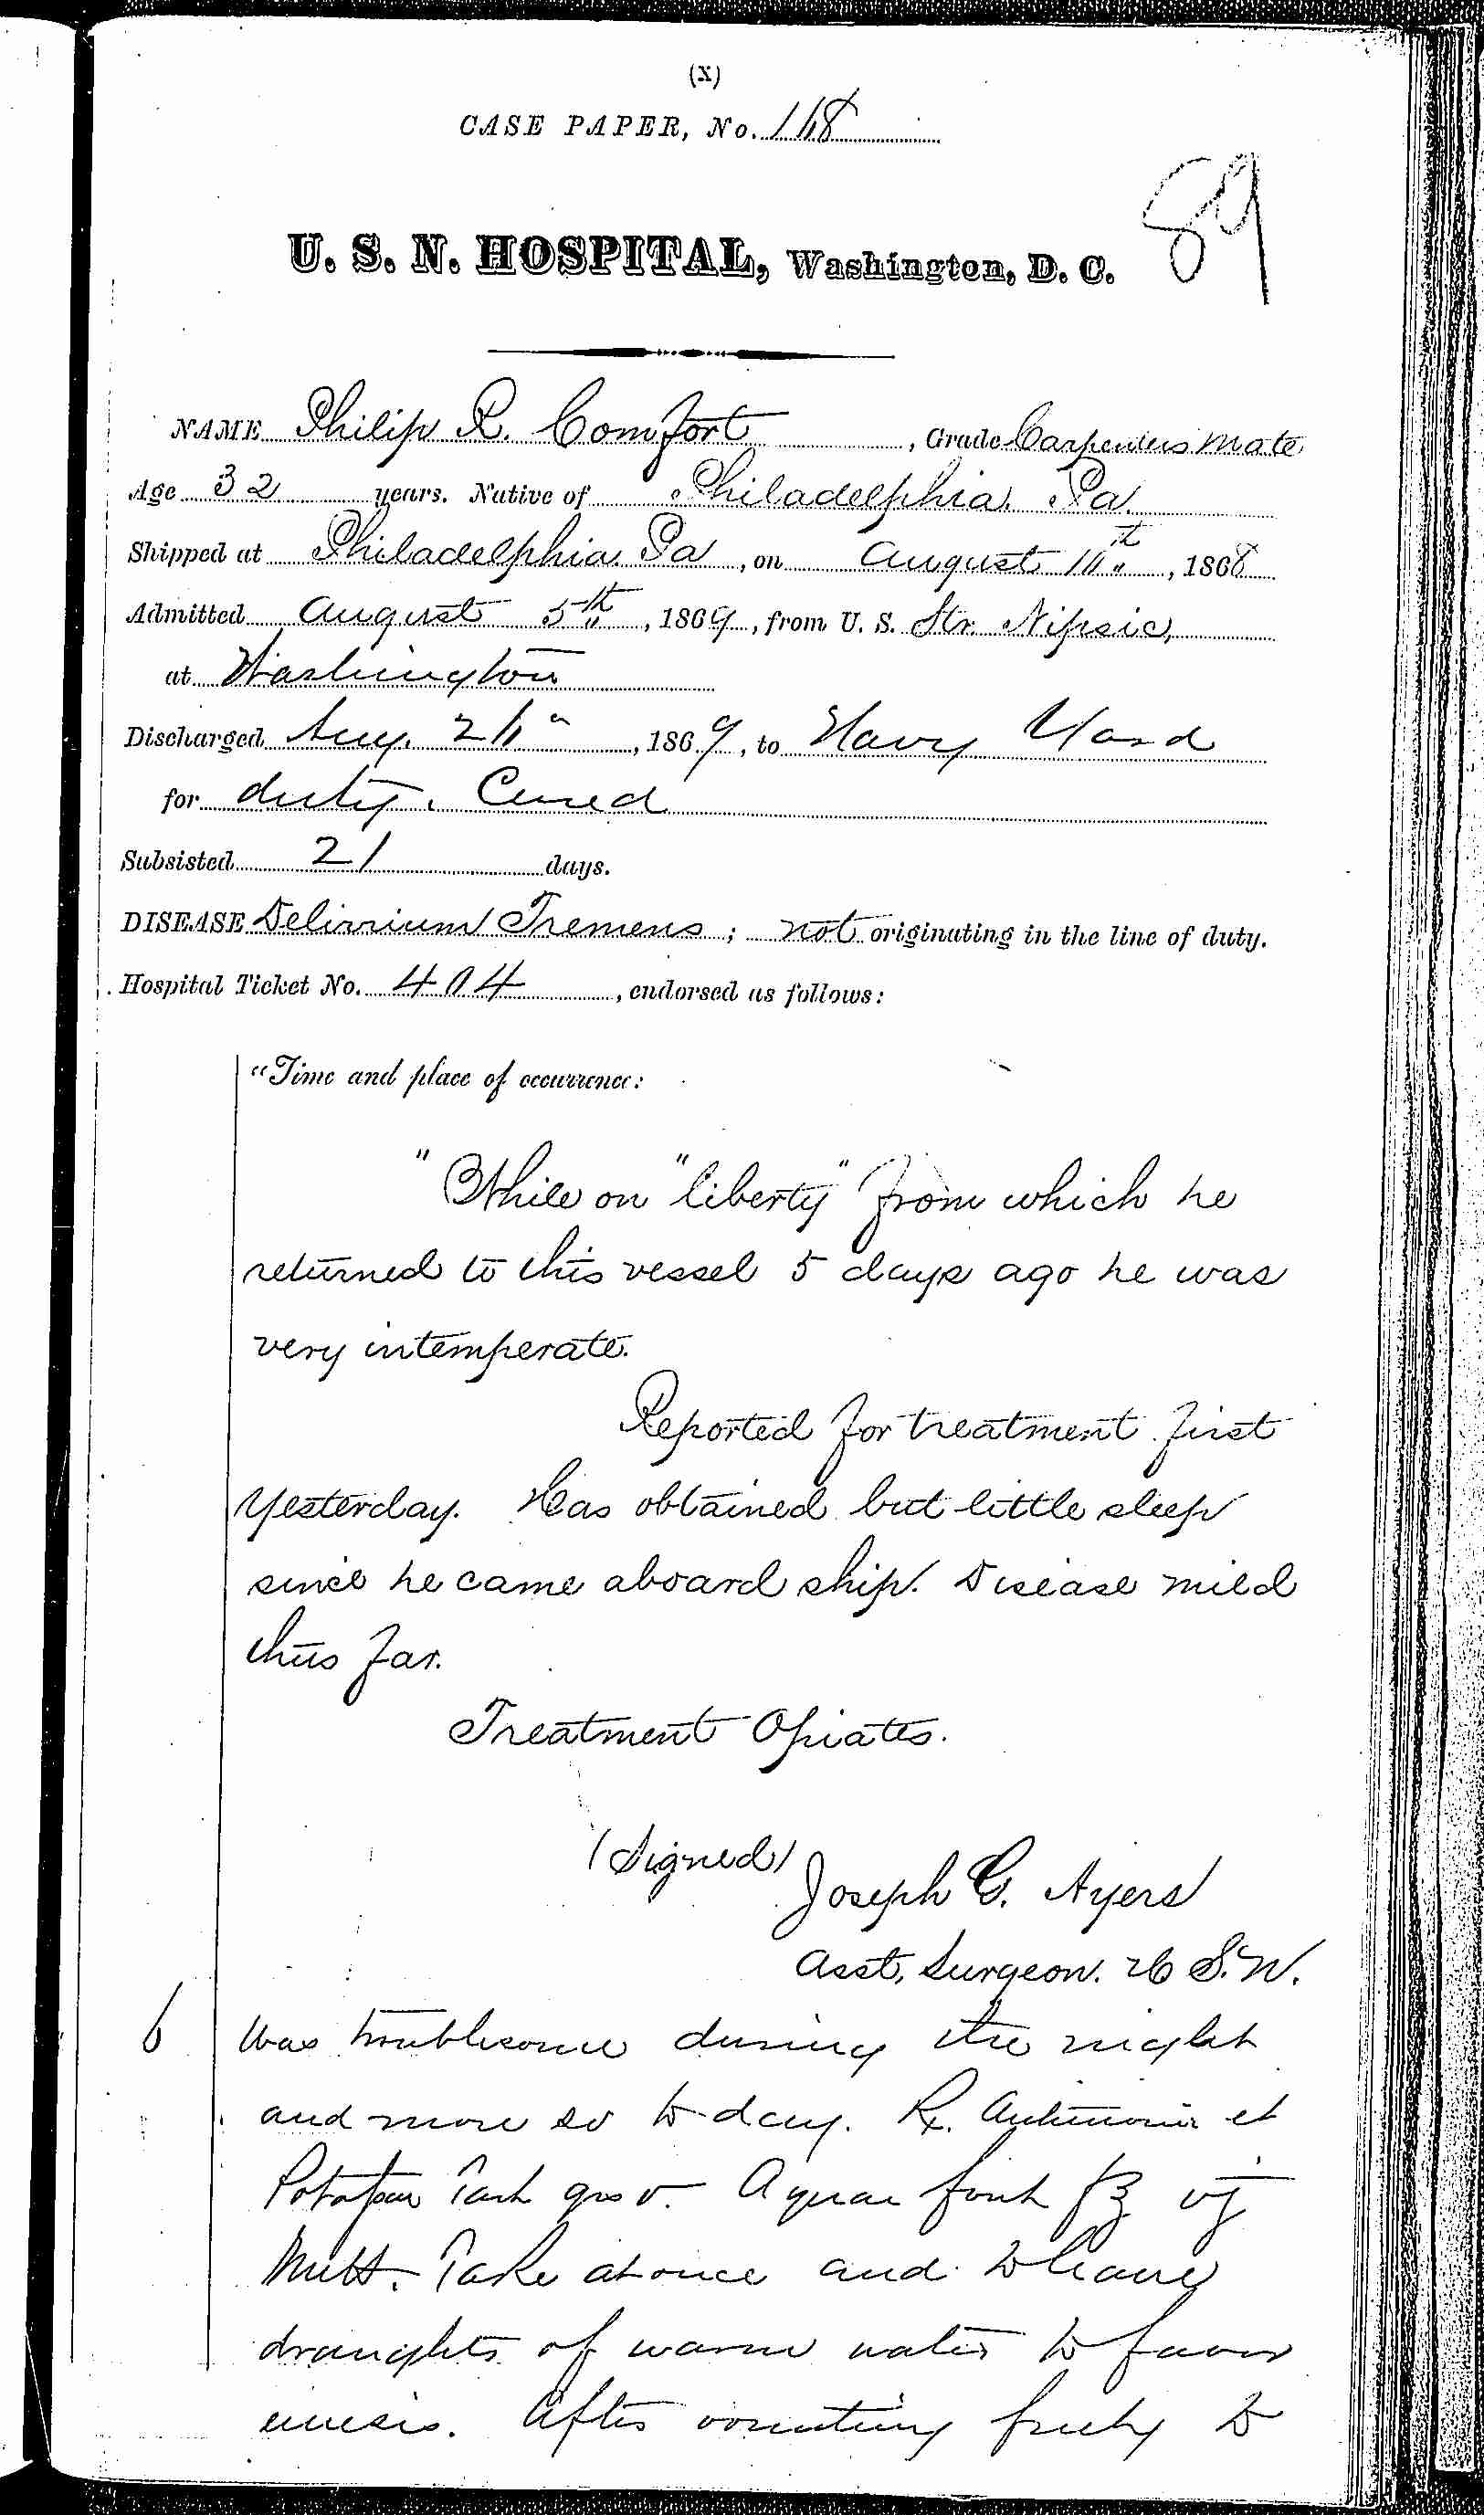 Entry for Philip R. Comfort (page 1 of 3) in the log Hospital Tickets and Case Papers - Naval Hospital - Washington, D.C. - 1868-69